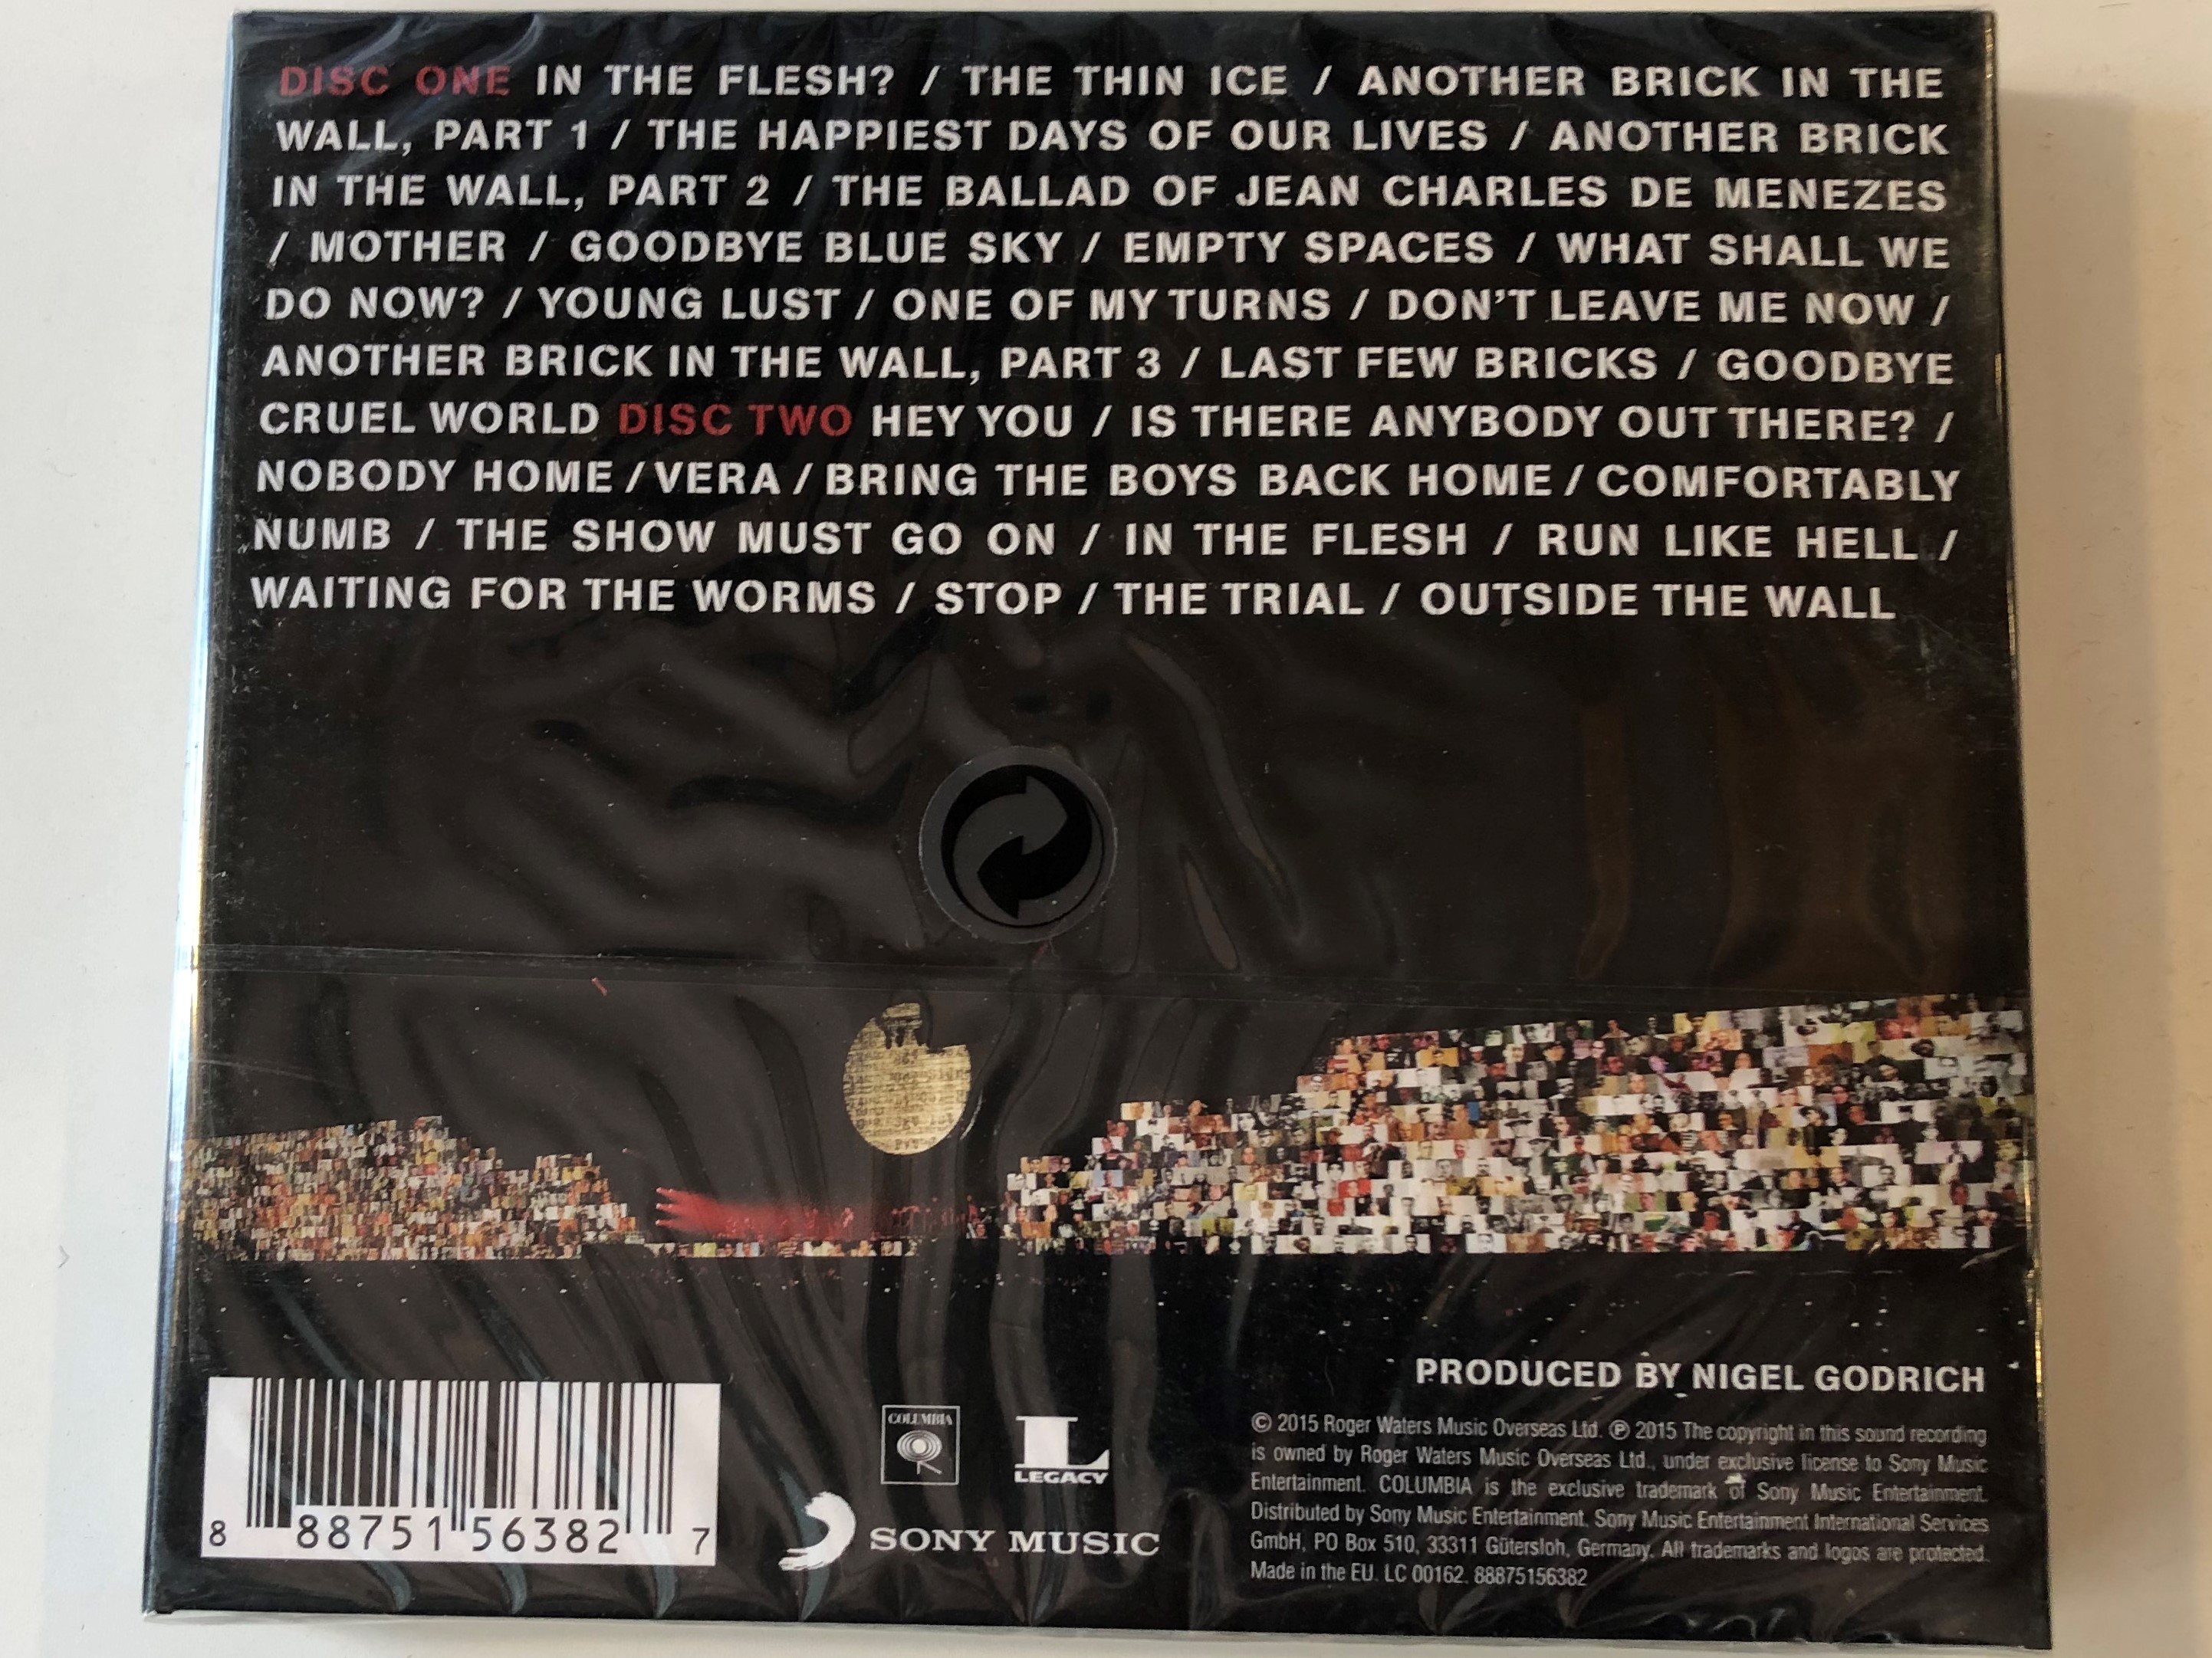 roger-waters-the-wall-the-soundtrack-from-a-film-by-roger-waters-and-sean-evans-2cd-set-featurinh-comfortably-numb-another-brick-in-the-wall-part-ii-mother-and-more-columbia-2.jpg